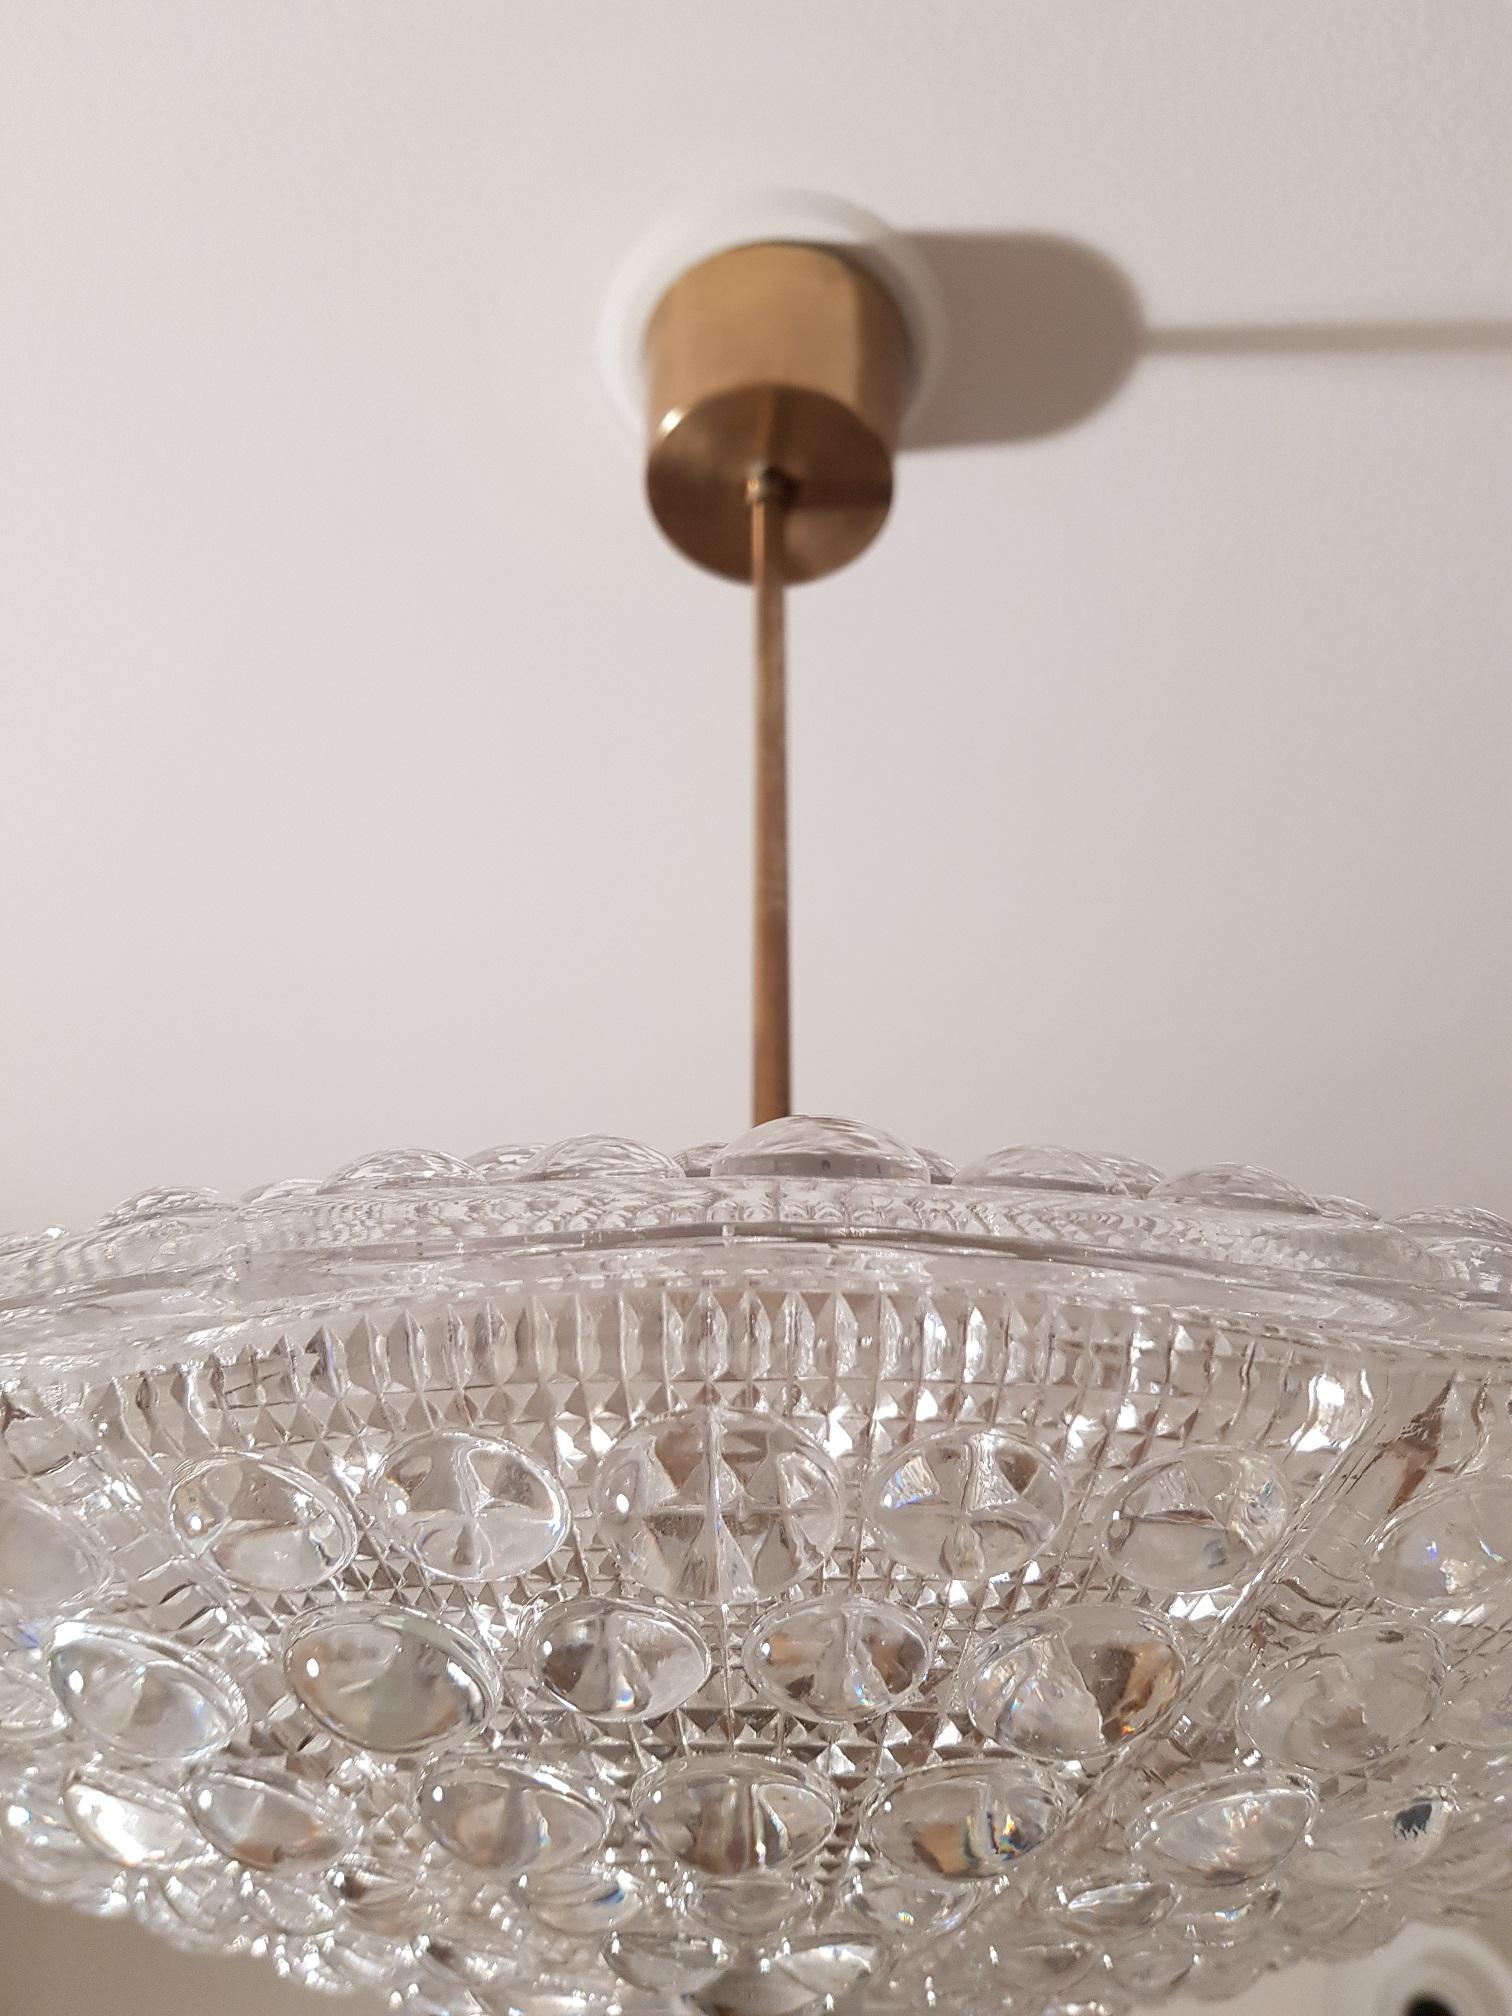 Carl Fagerlund Dual Disc Chandelier Brass and Glass 1960s, Orrefors Sweden For Sale 4